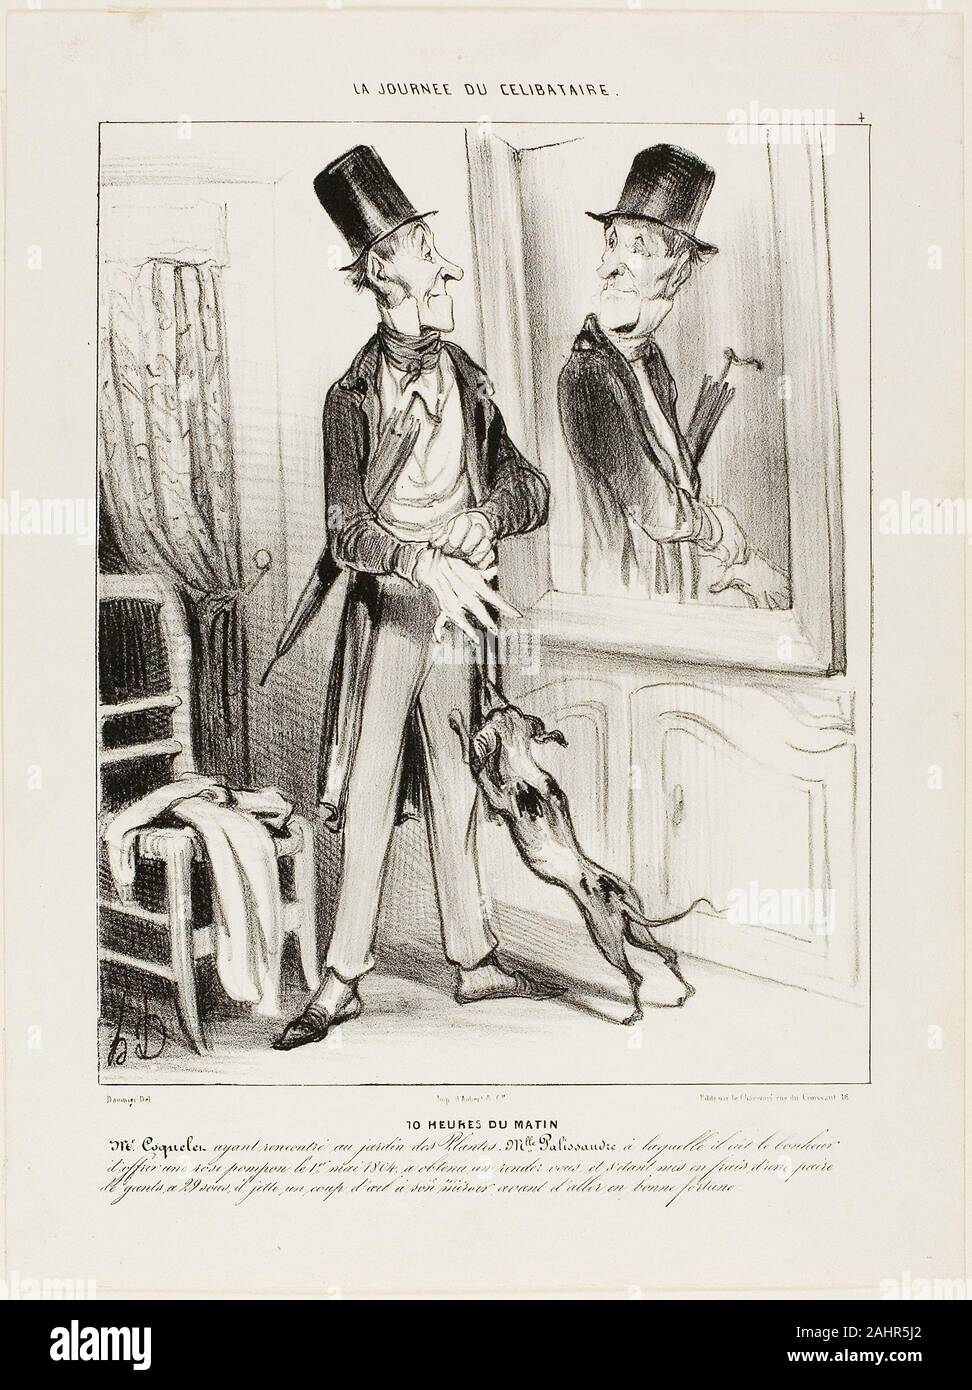 Honoré-Victorin Daumier. 10 O'clock in the Morning. “Monsieur Coquelet having accidentally met Miss Palissandre in the Botanical Garden, to whom he had the good fortune to offer a fairy rose the first of May 1804, had obtained a first date. After having gone to great expense buying a new pair of gloves at 29 Sous, he throws a glance at the mirror before going out to try his good fortune,” plate 4 from La Journé Du Célibataire. 1839. France. Lithograph in black on white wove paper Stock Photo